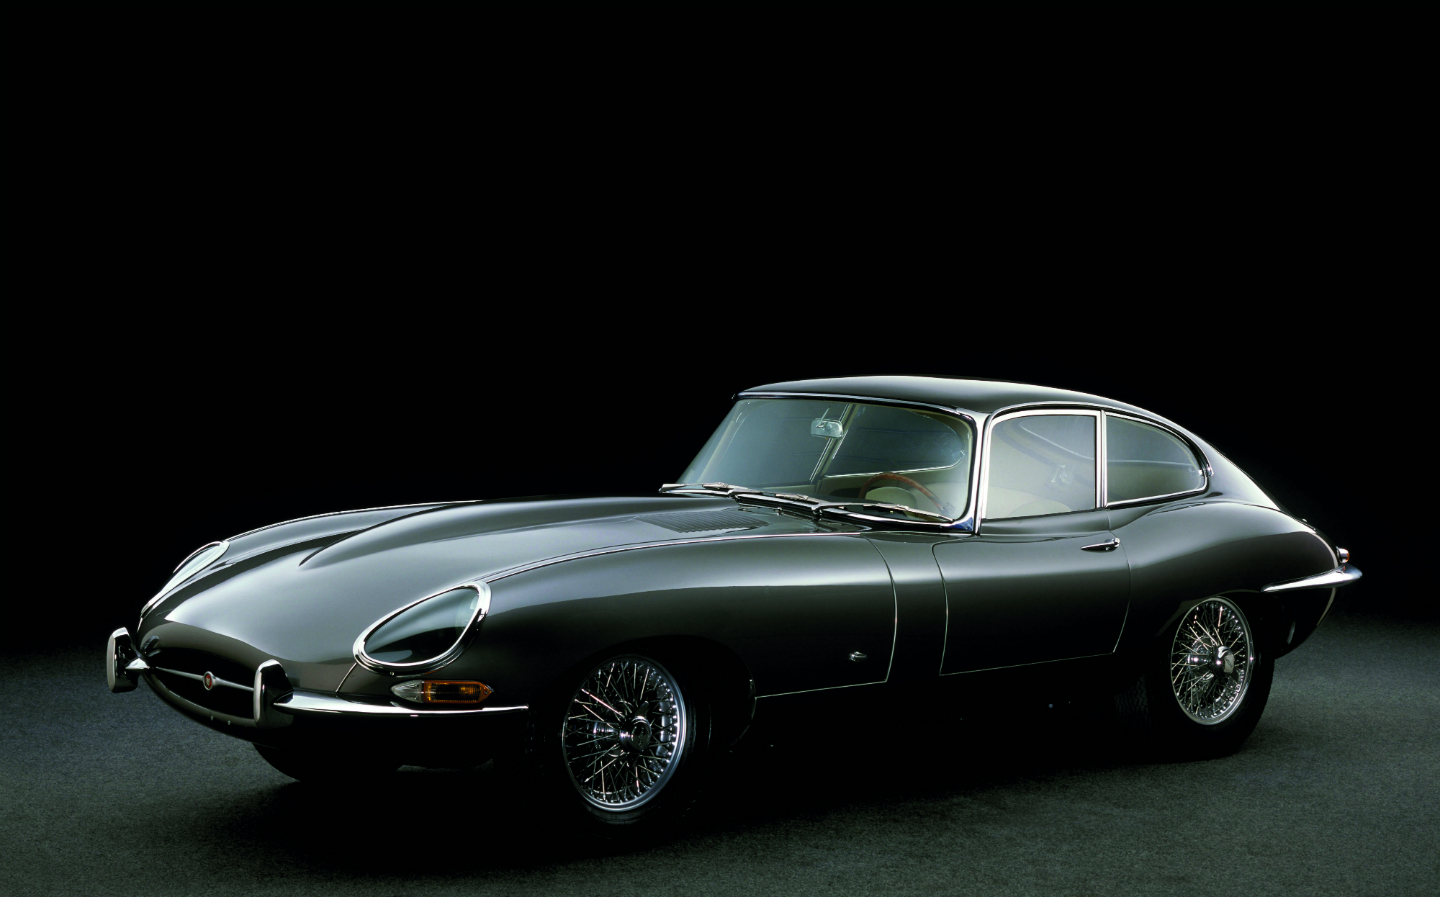 The 'world's most important' Jaguar E-Type is up for sale